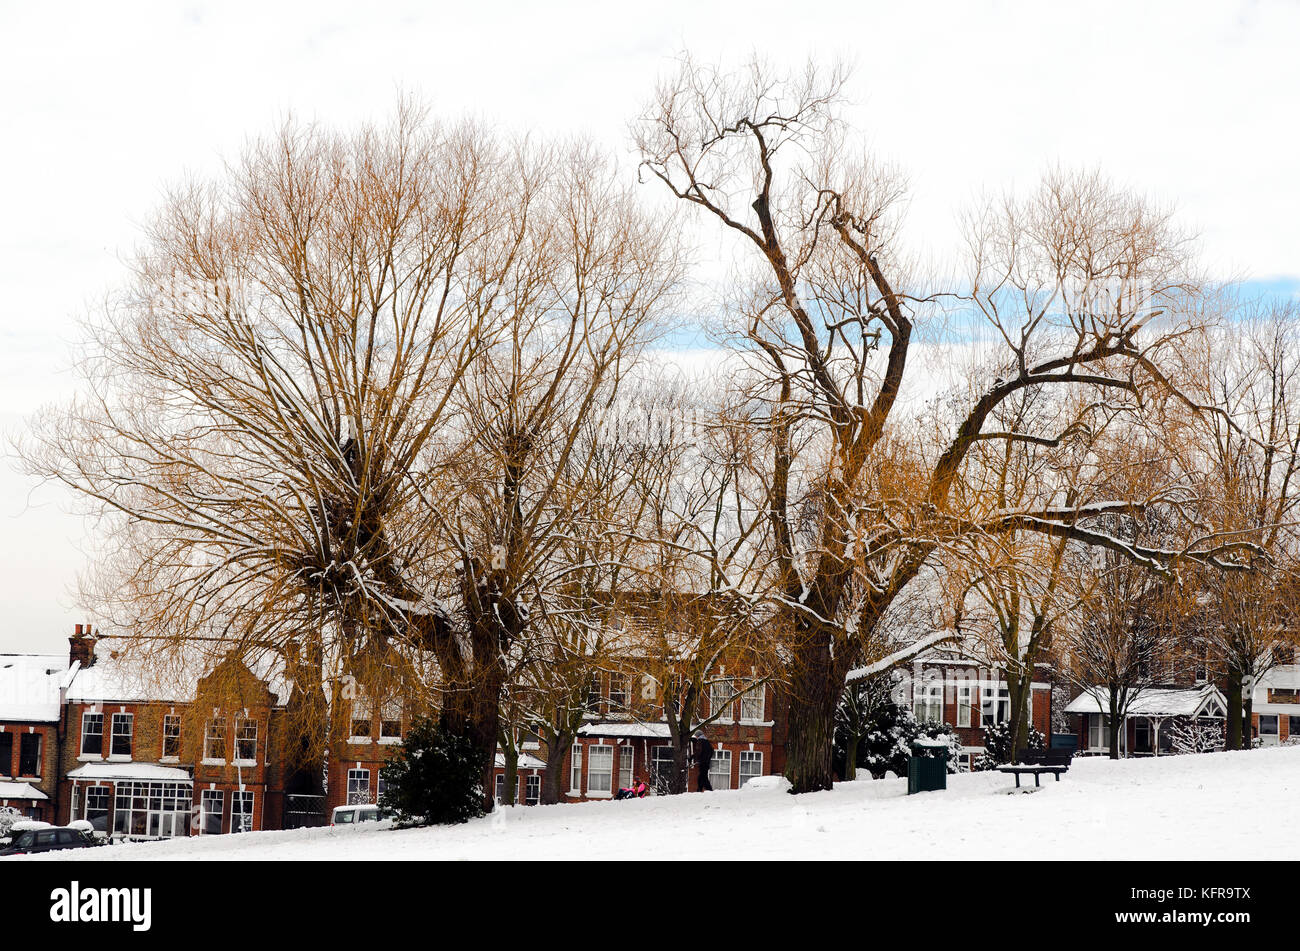 Snowy scene at Hilly Fields Park - London, England Stock Photo